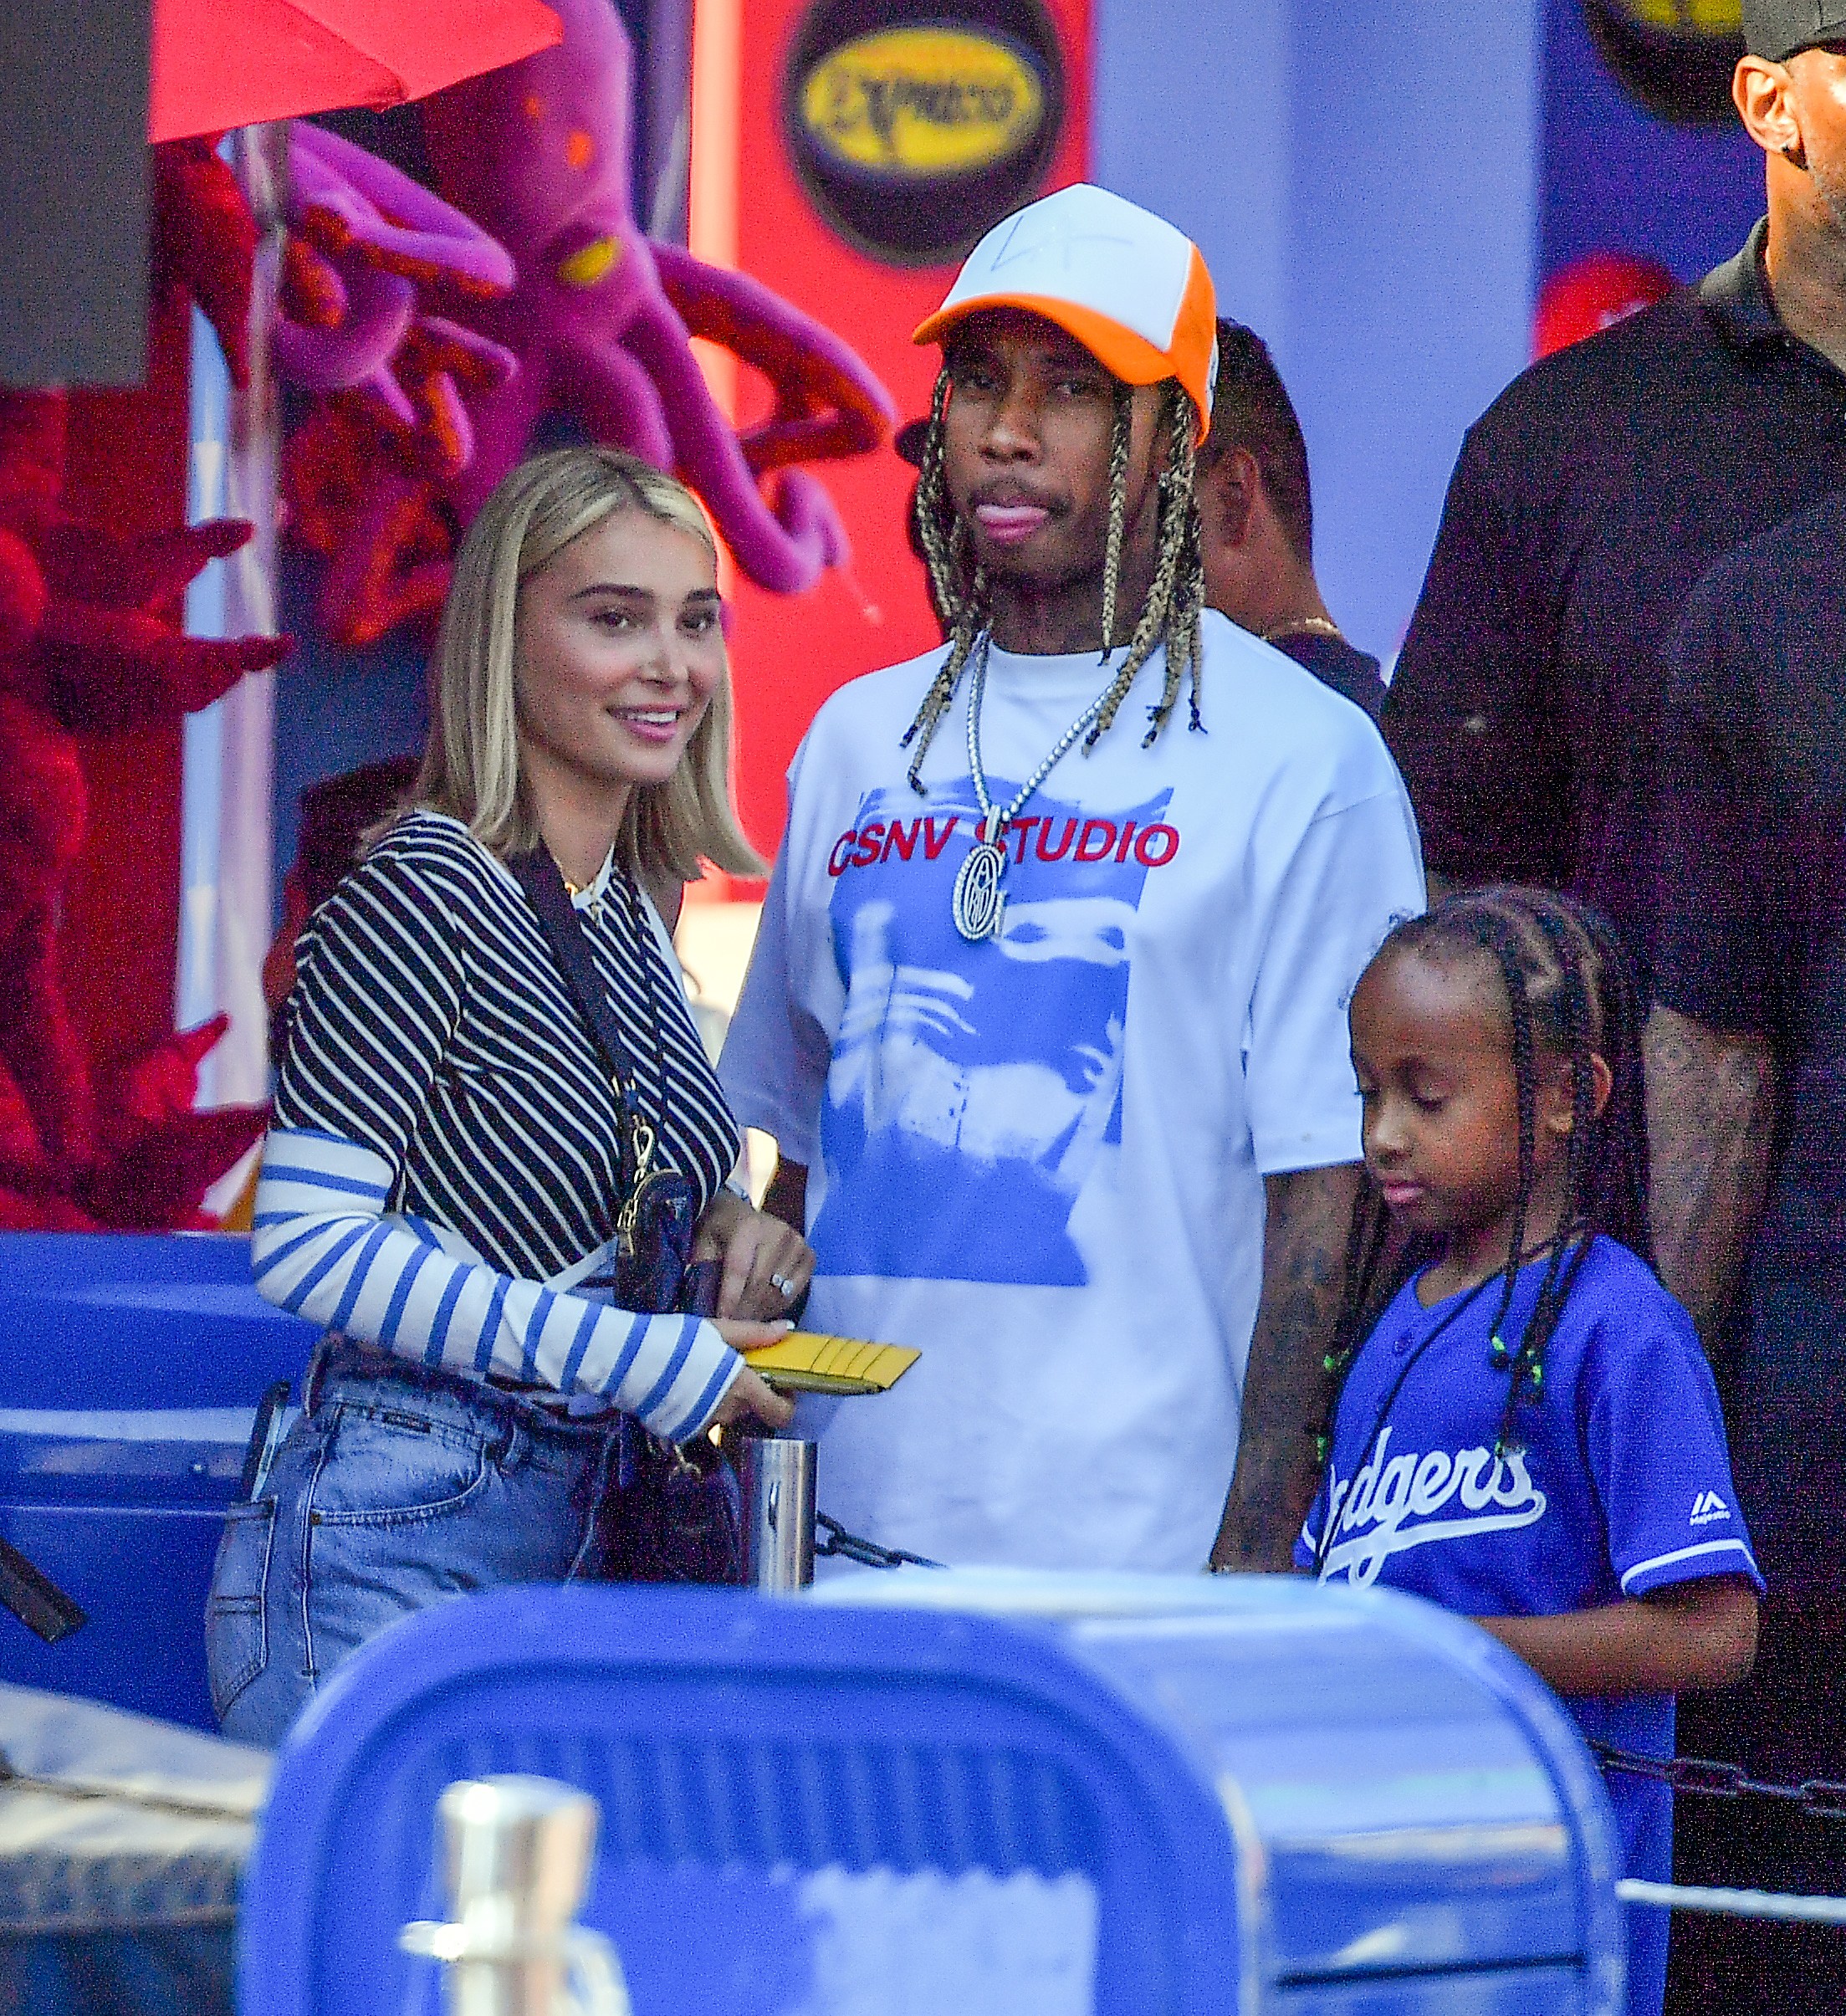 Tyga, Son King And Camaryn Swanson Spotted At Universal Studios